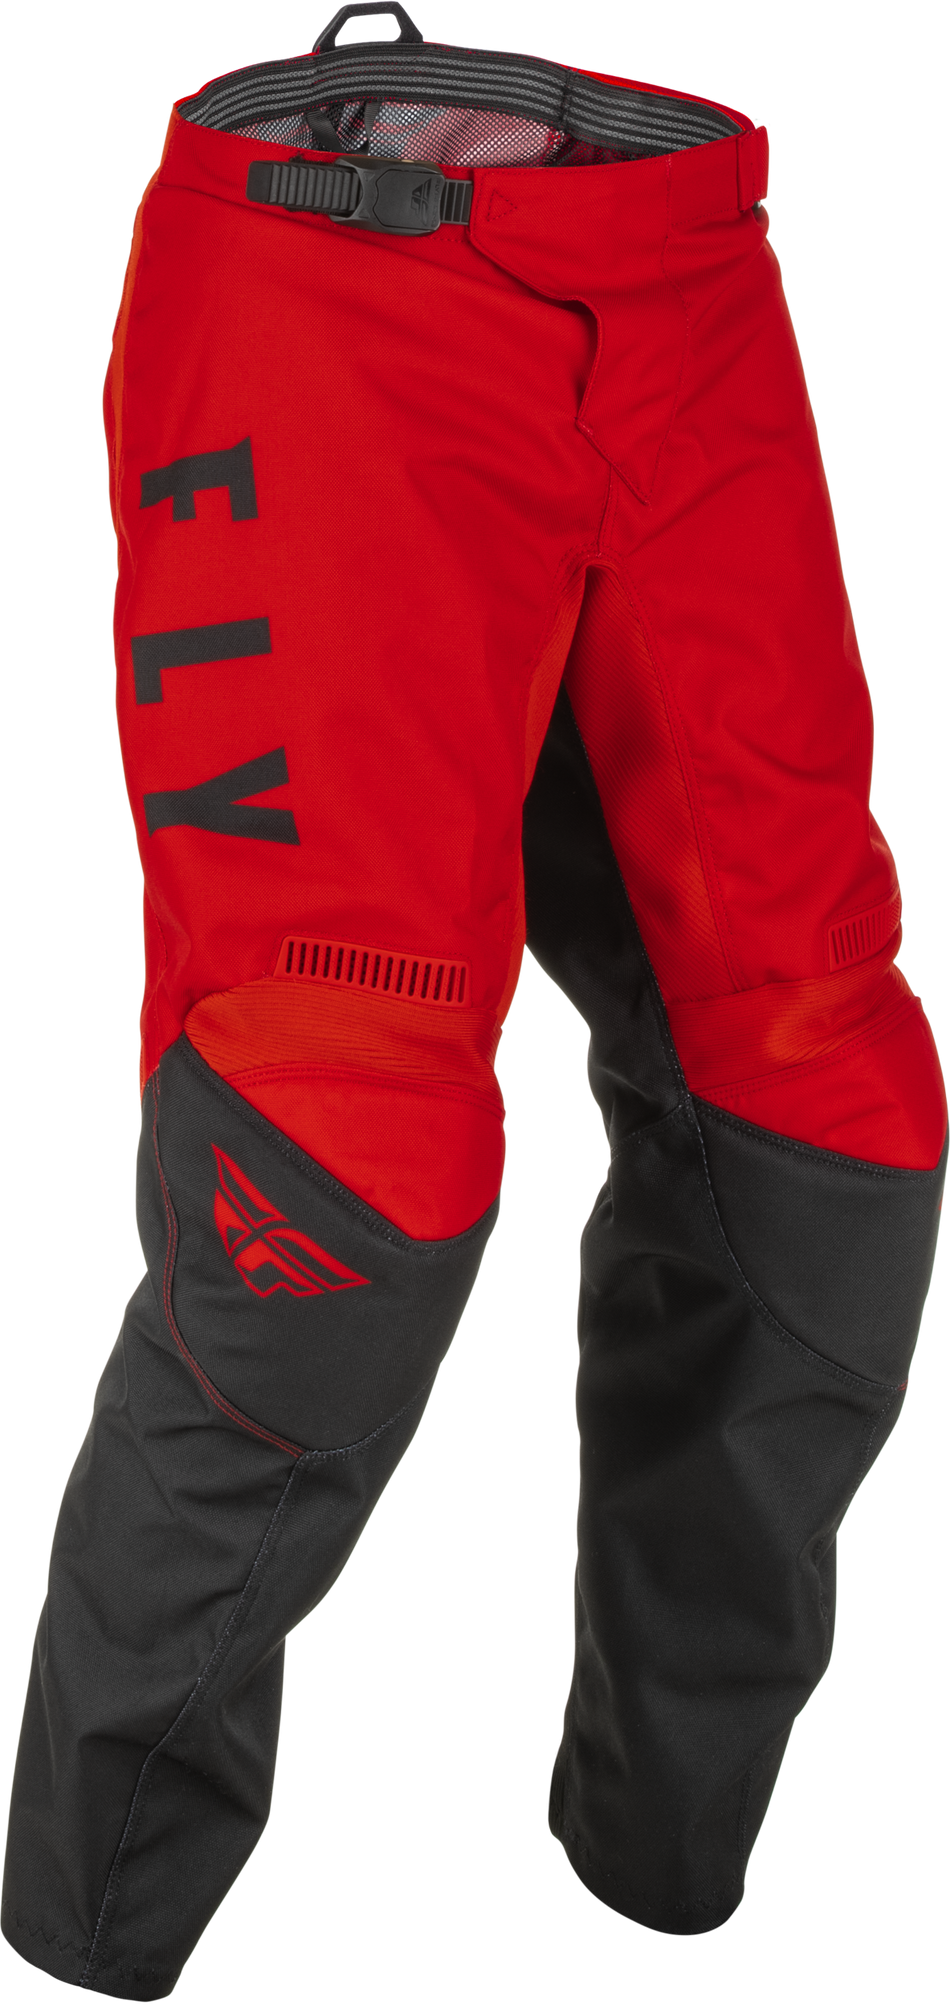 FLY RACING Youth F-16 Pants Red/Black Sz 18 375-93318